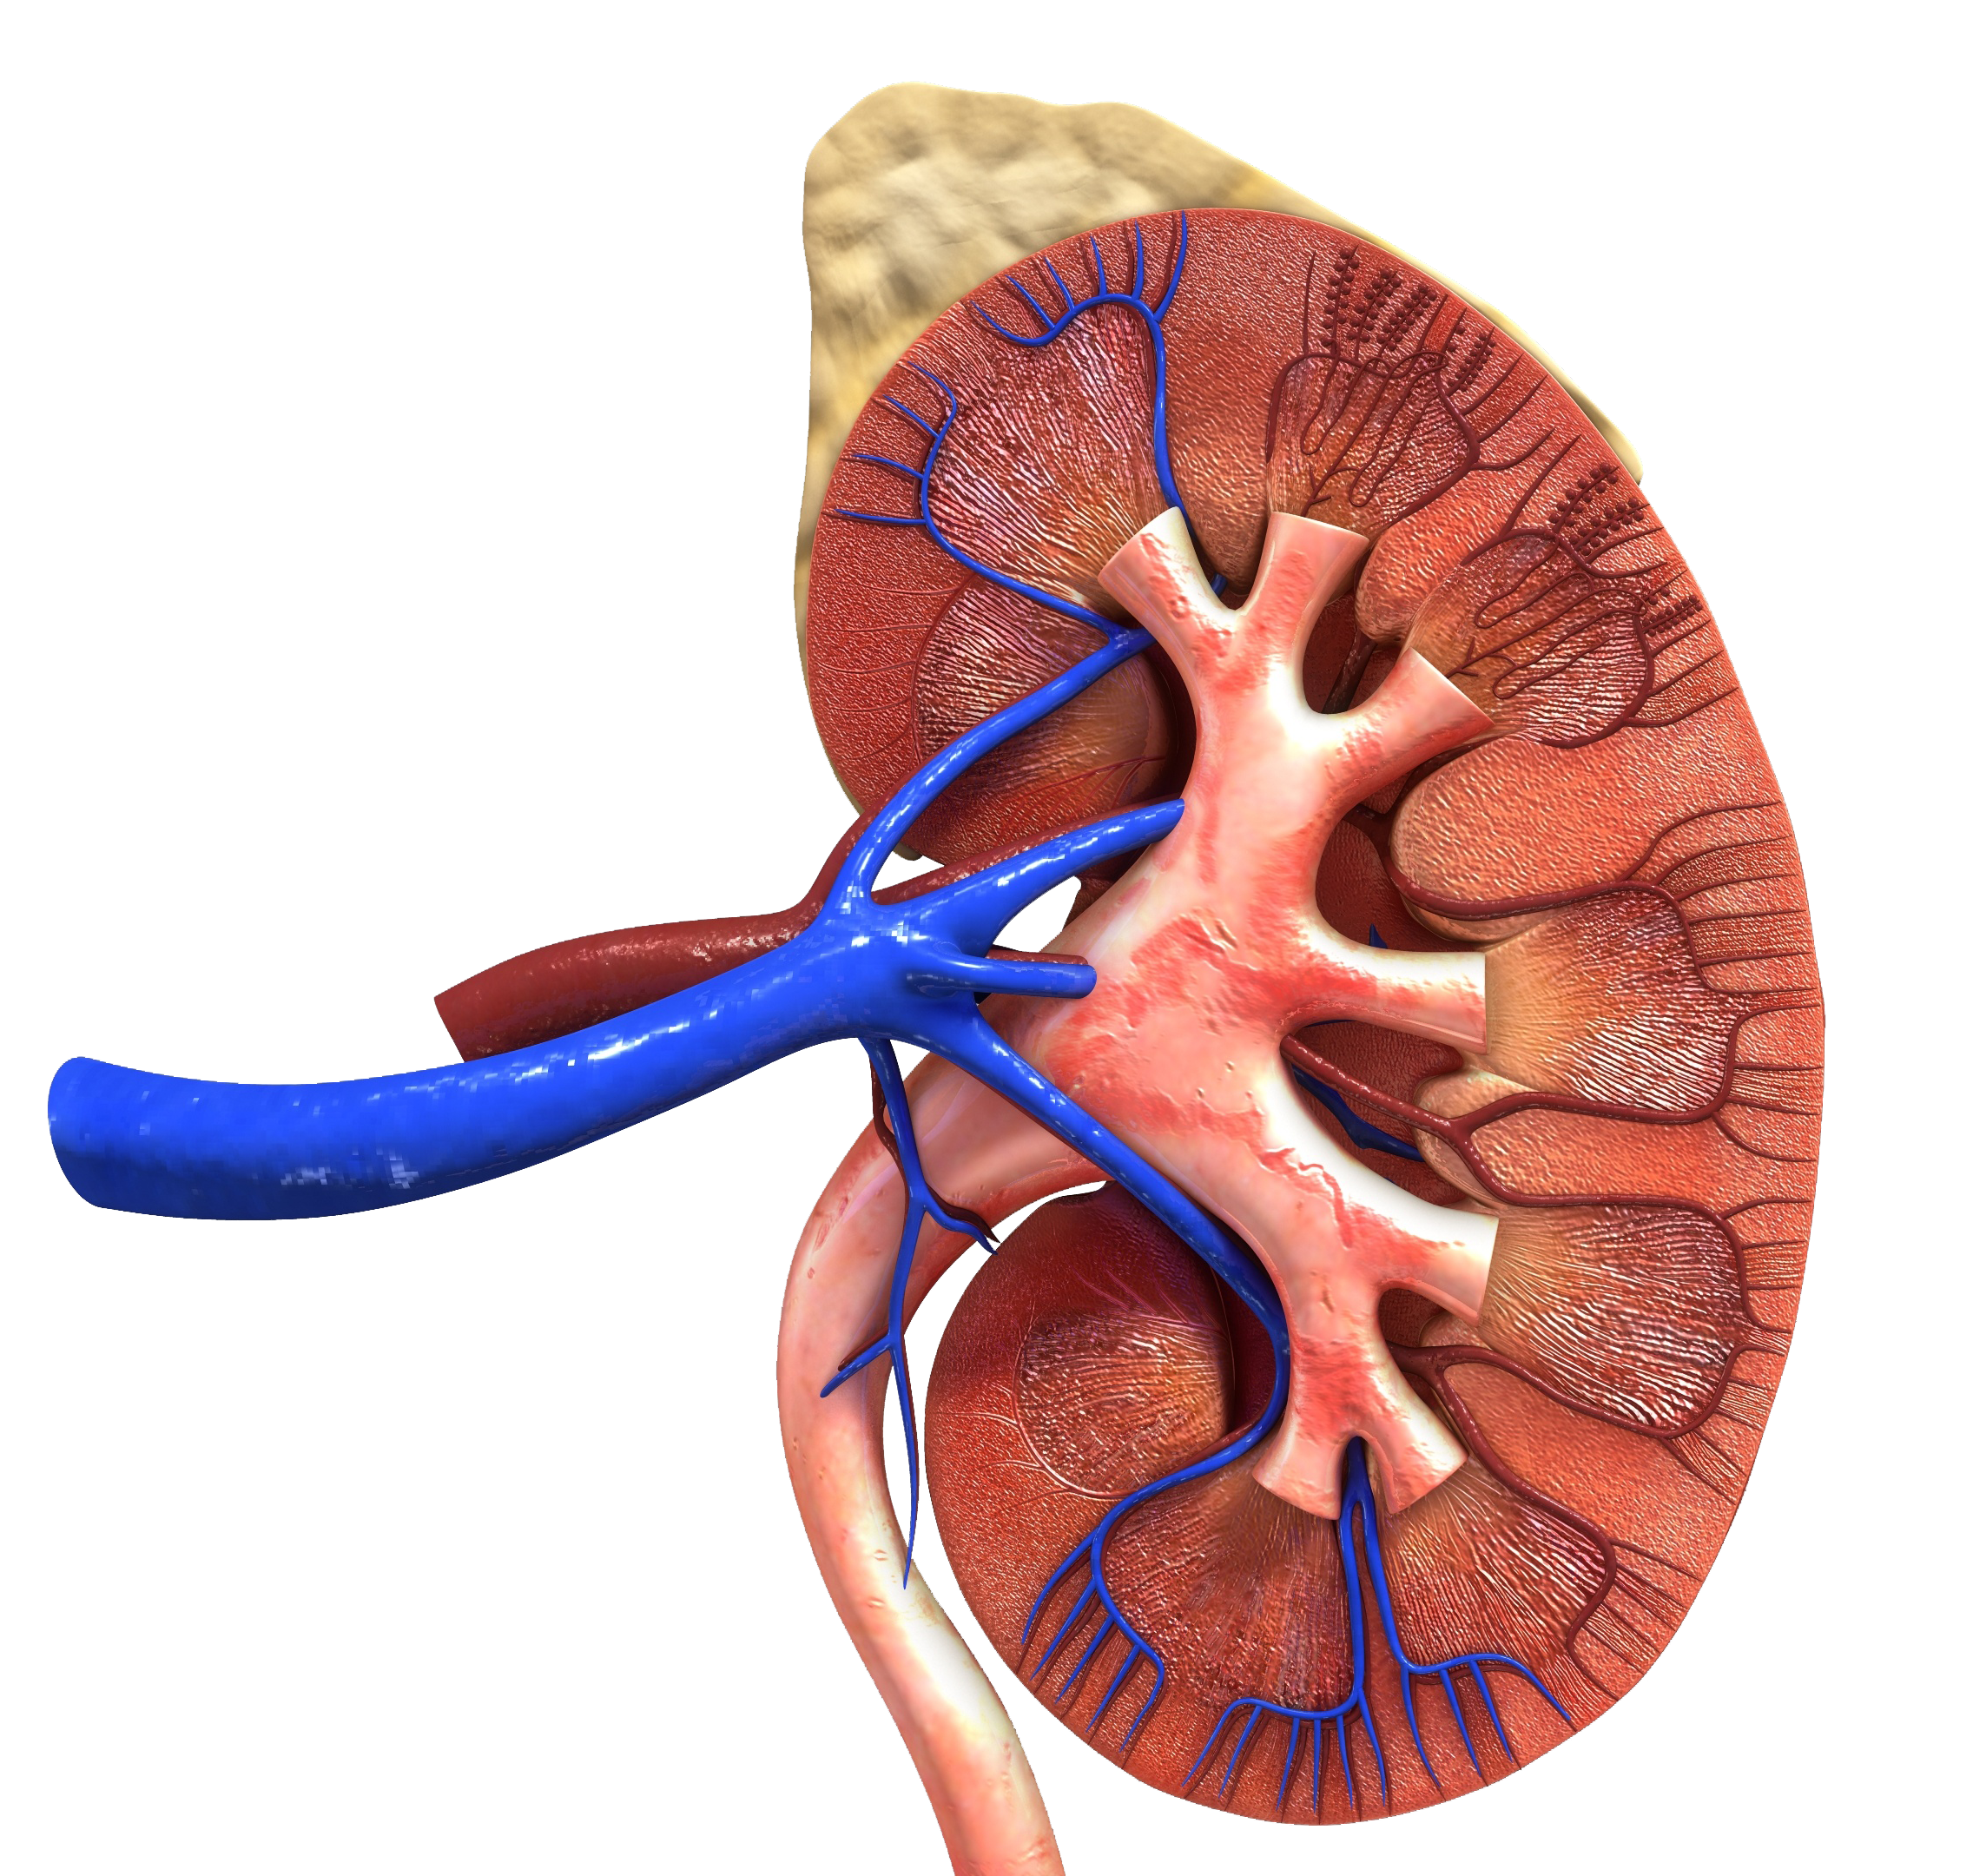 animated illustration of a kidney